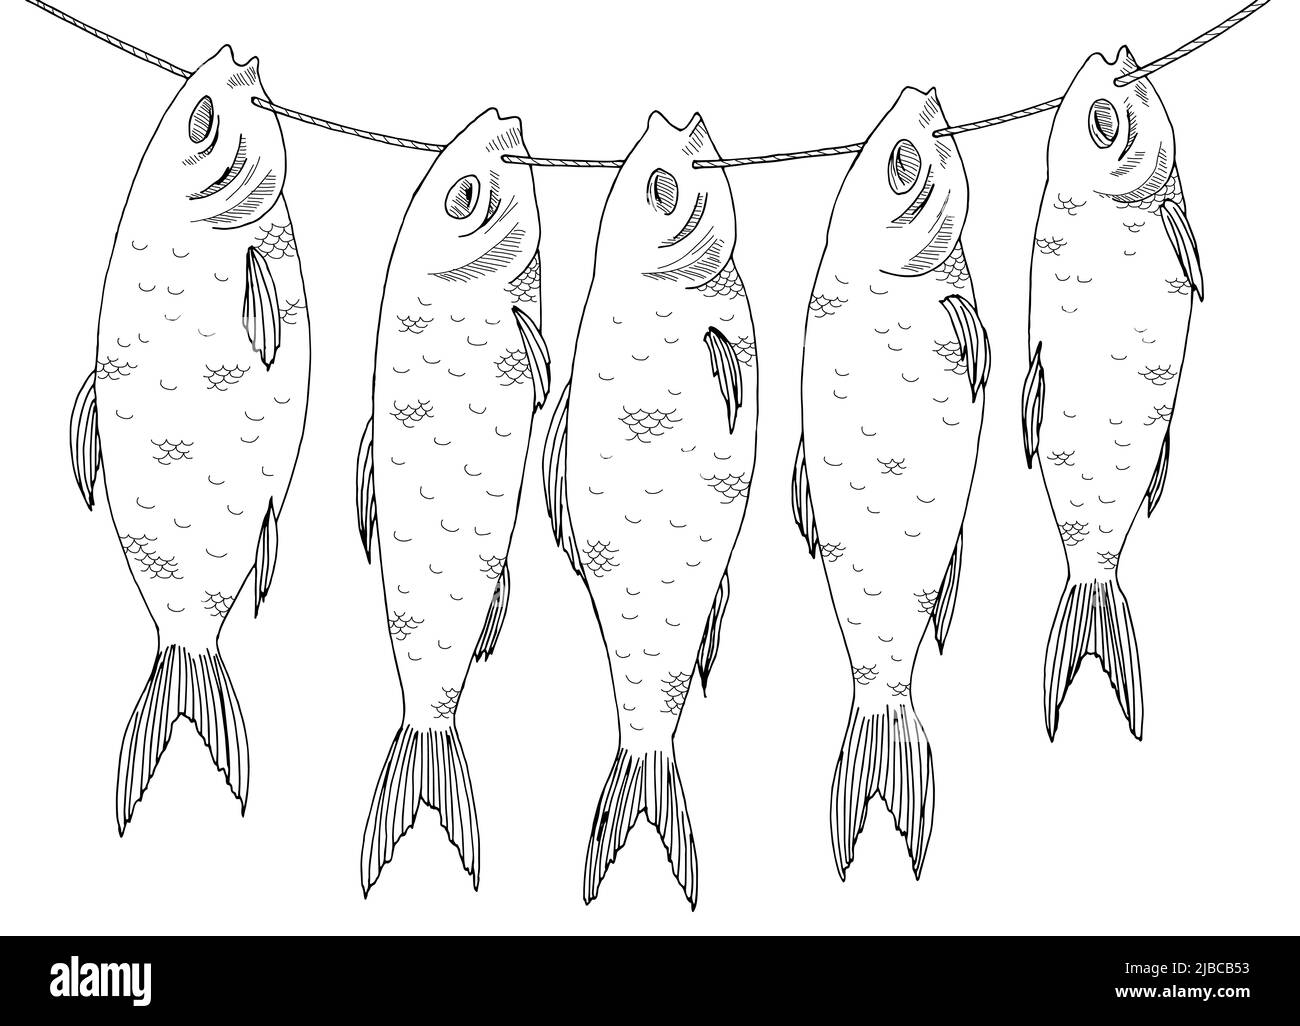 Fish is drying on the rope graphic black white sketch illustration vector Stock Vector